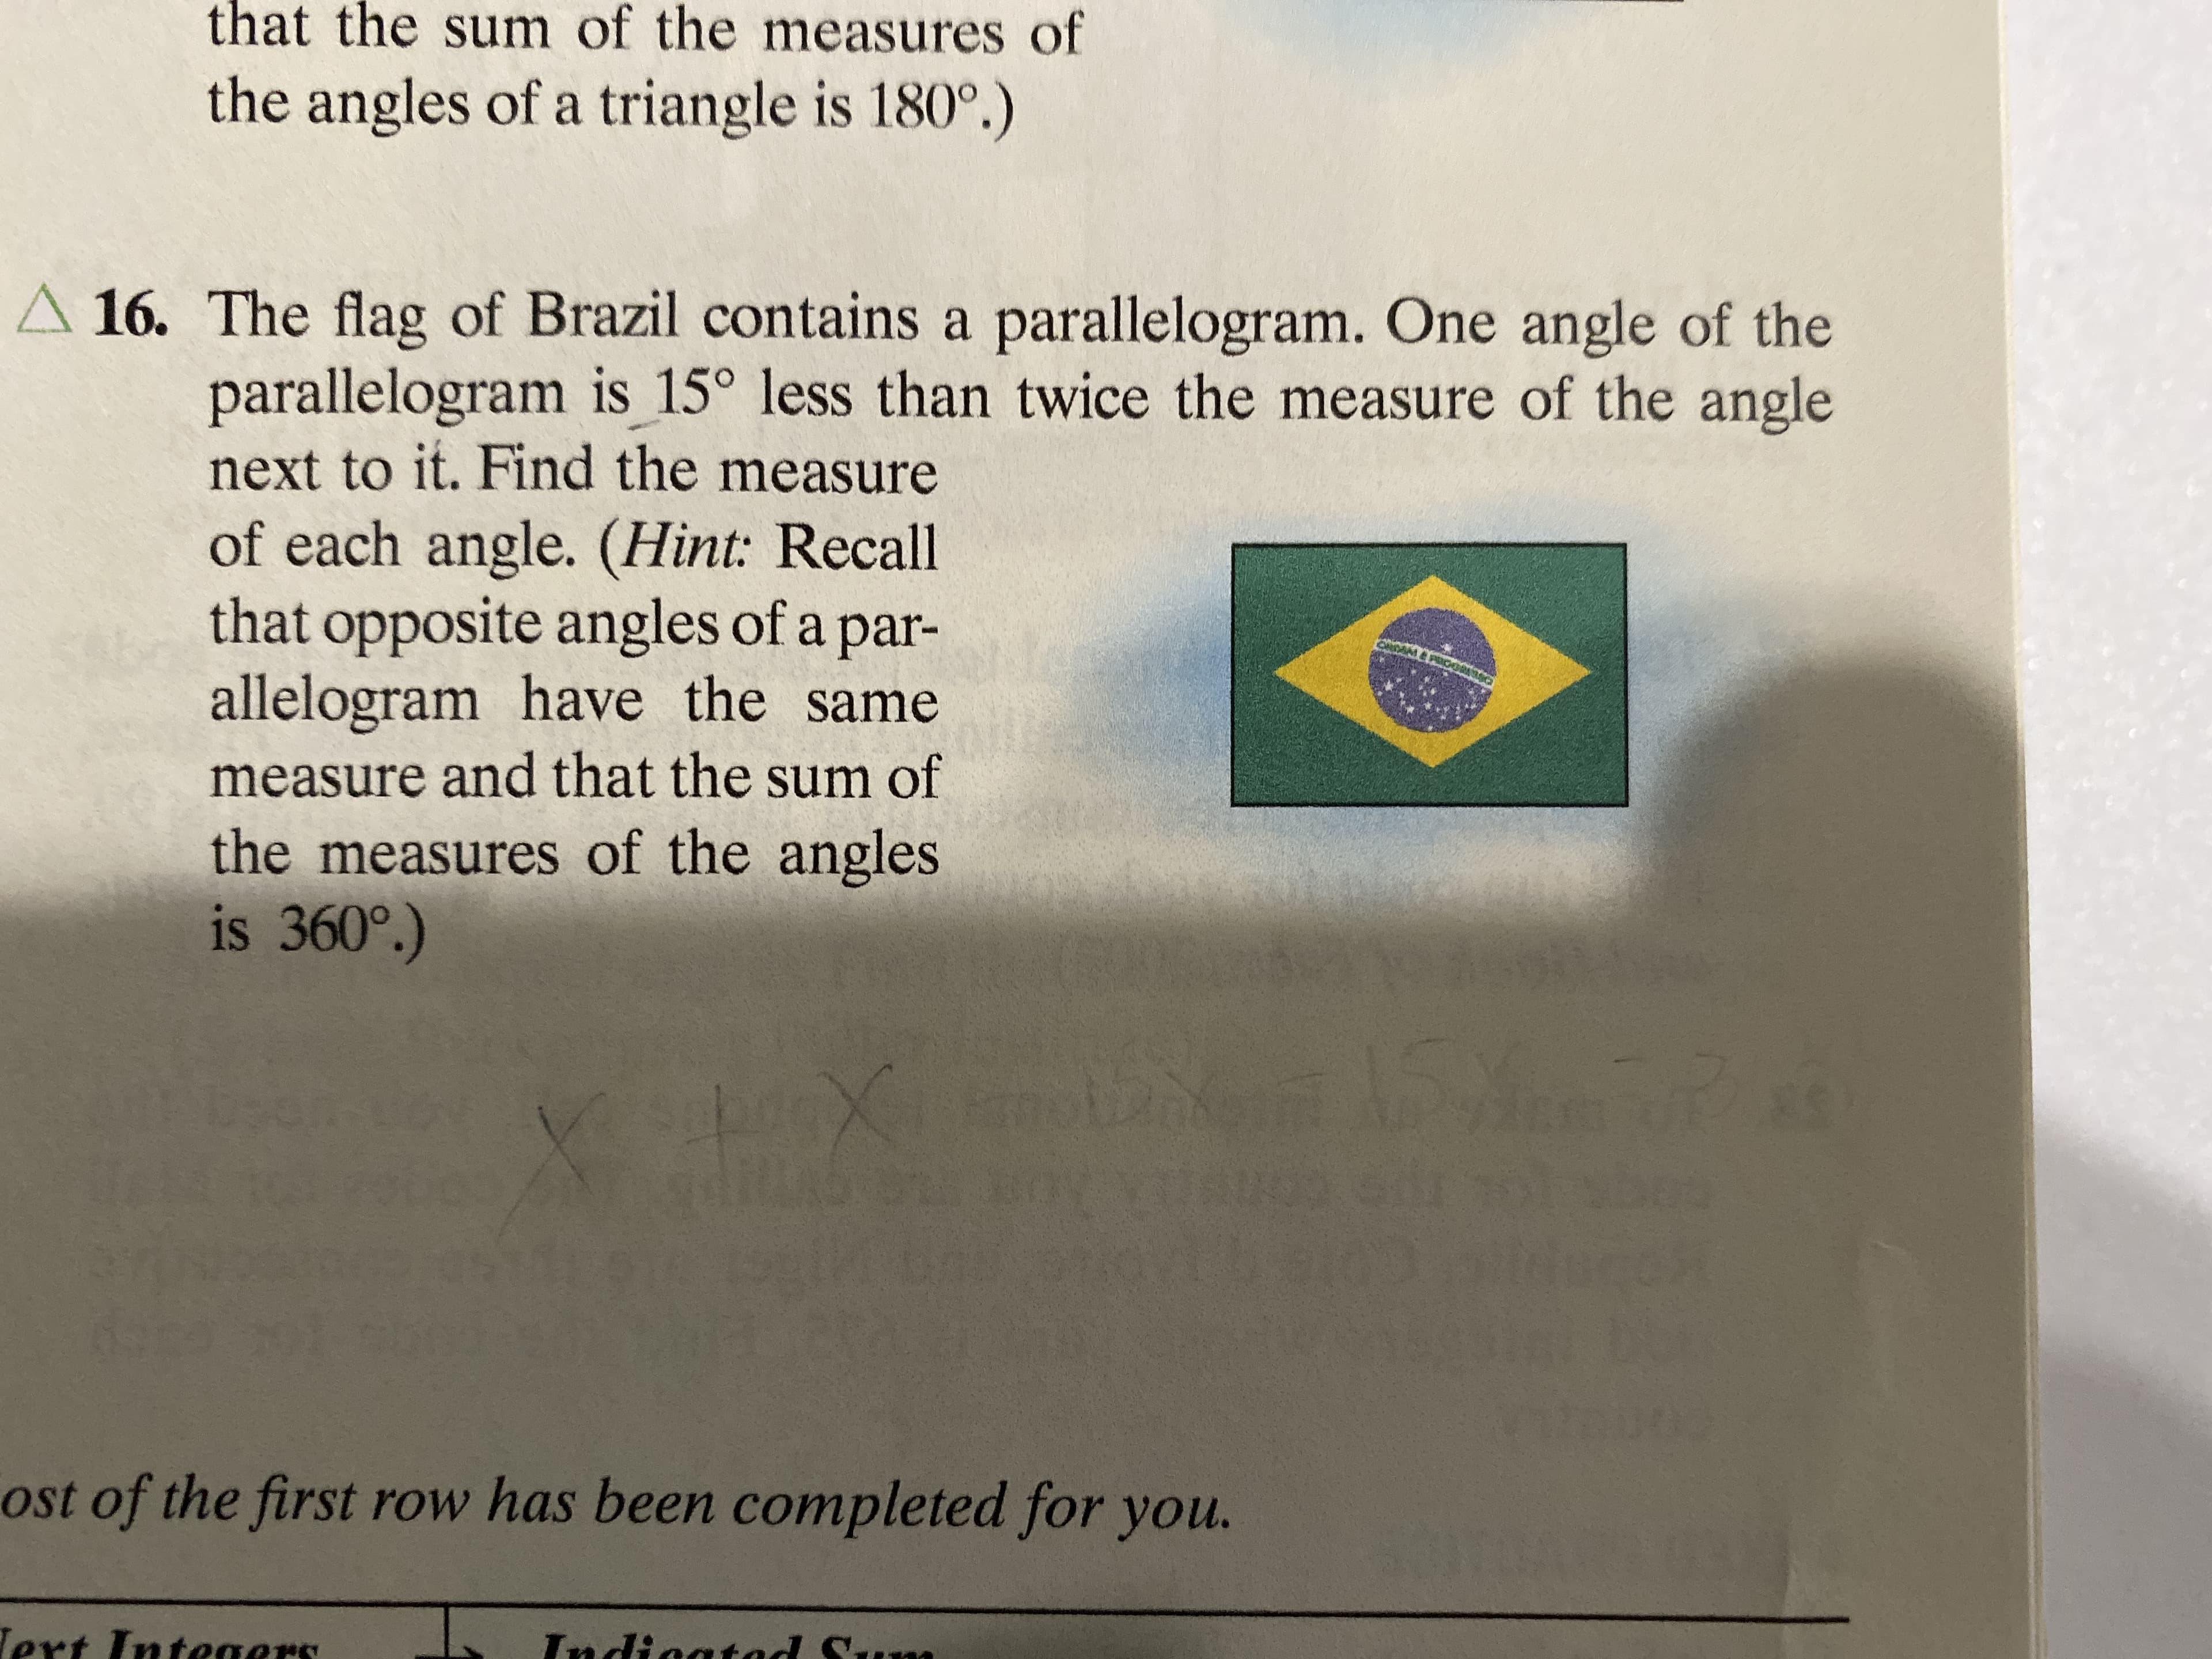 that the sum of the measures of
the angles of a triangle is 180°.)
A 16. The flag of Brazil contains a parallelogram. One angle of the
parallelogram is 15° less than twice the measure of the angle
next to it. Find the measure
of each angle. (Hint: Recall
that opposite angles of a par-
allelogram have the
measure and that the sum of
same
the measures of the angles
is 360°.)
15
X
ost of the first row has been completed for you.
Tert Intesaers
Tndictad S a
